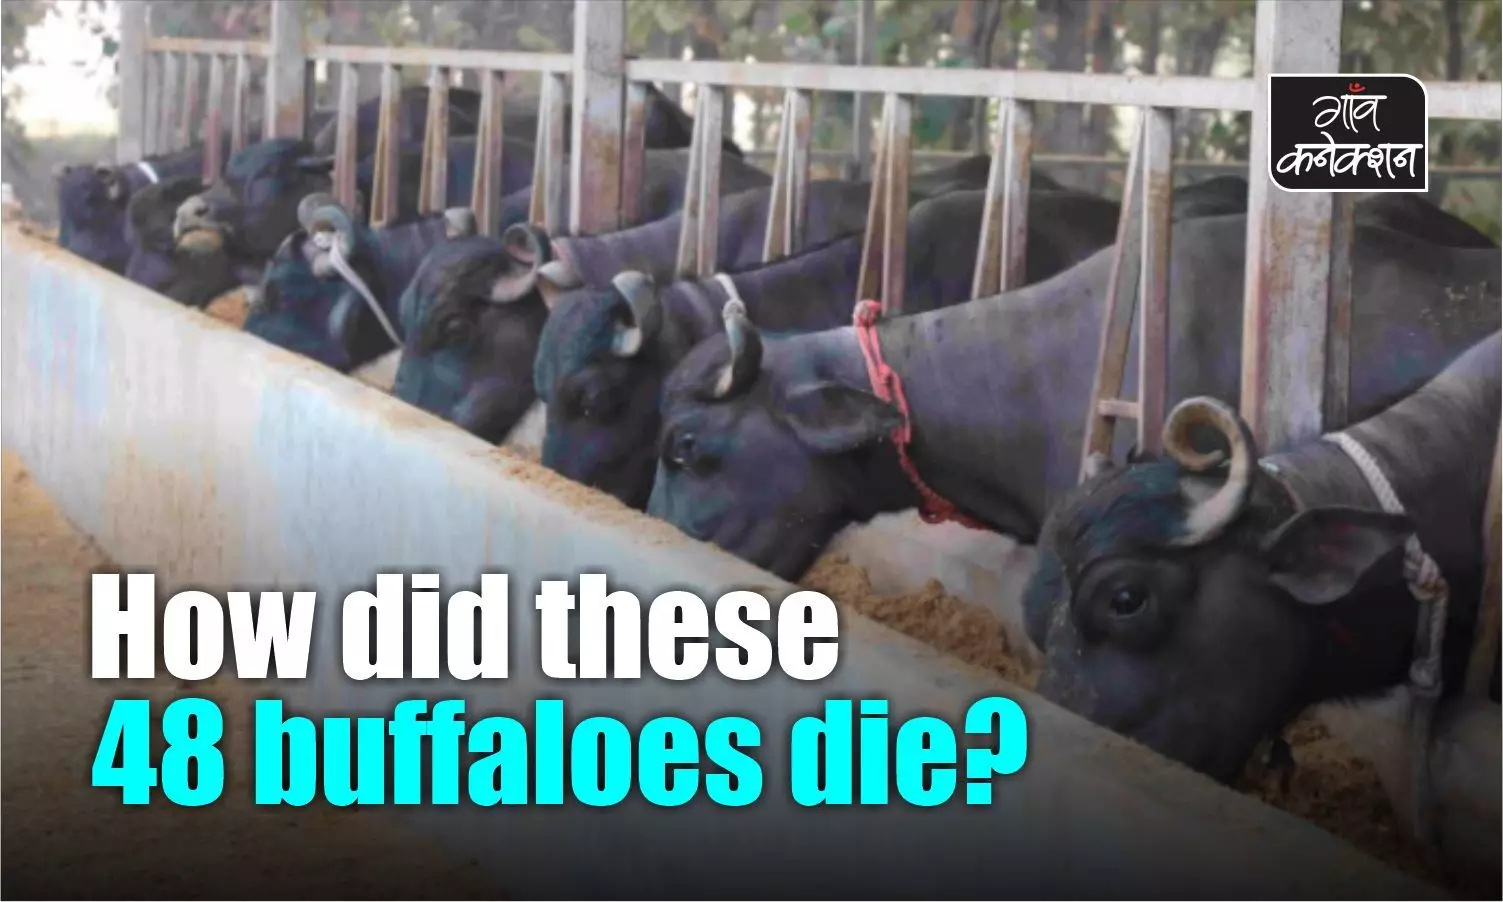 Mystery shrouds death of 48 buffaloes at Haryanas National Dairy Research Institute